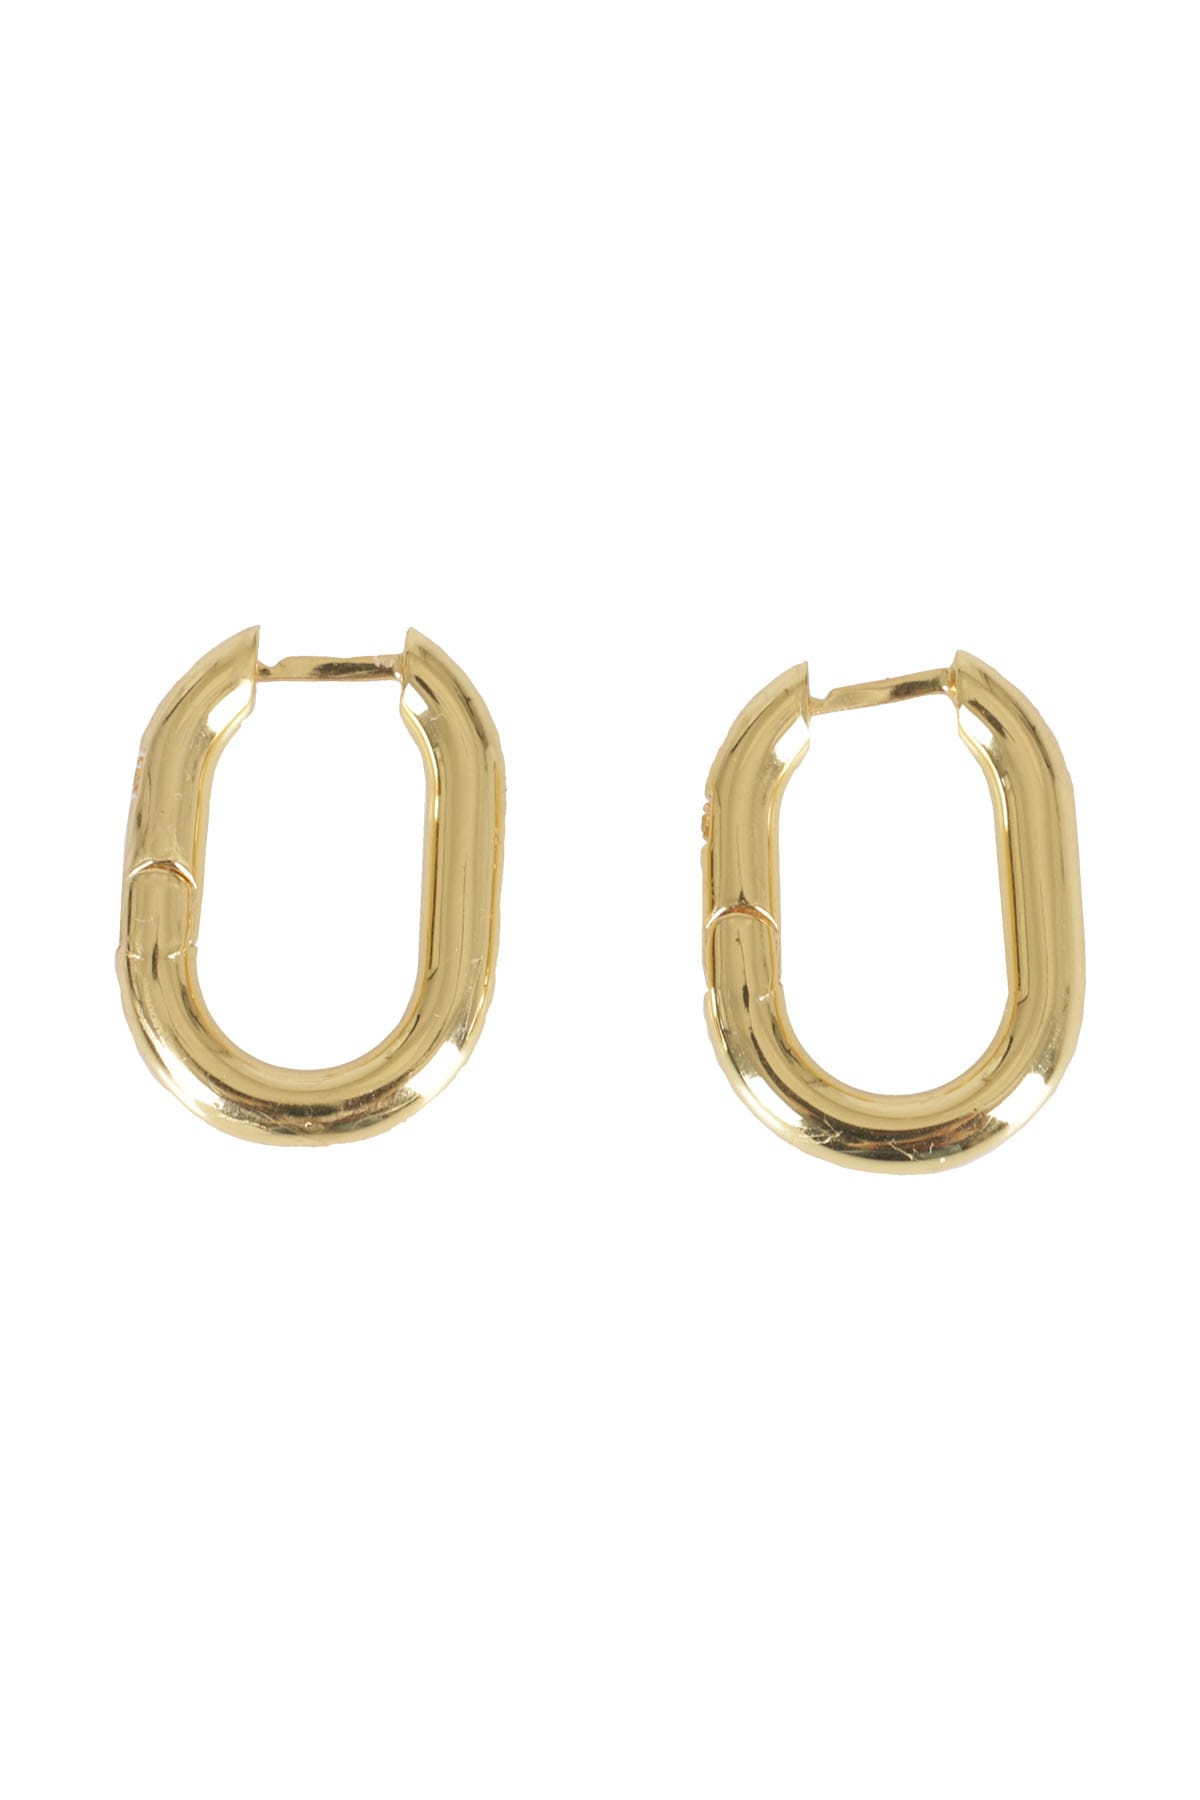 Federica Tosi Earring Christy In Gold